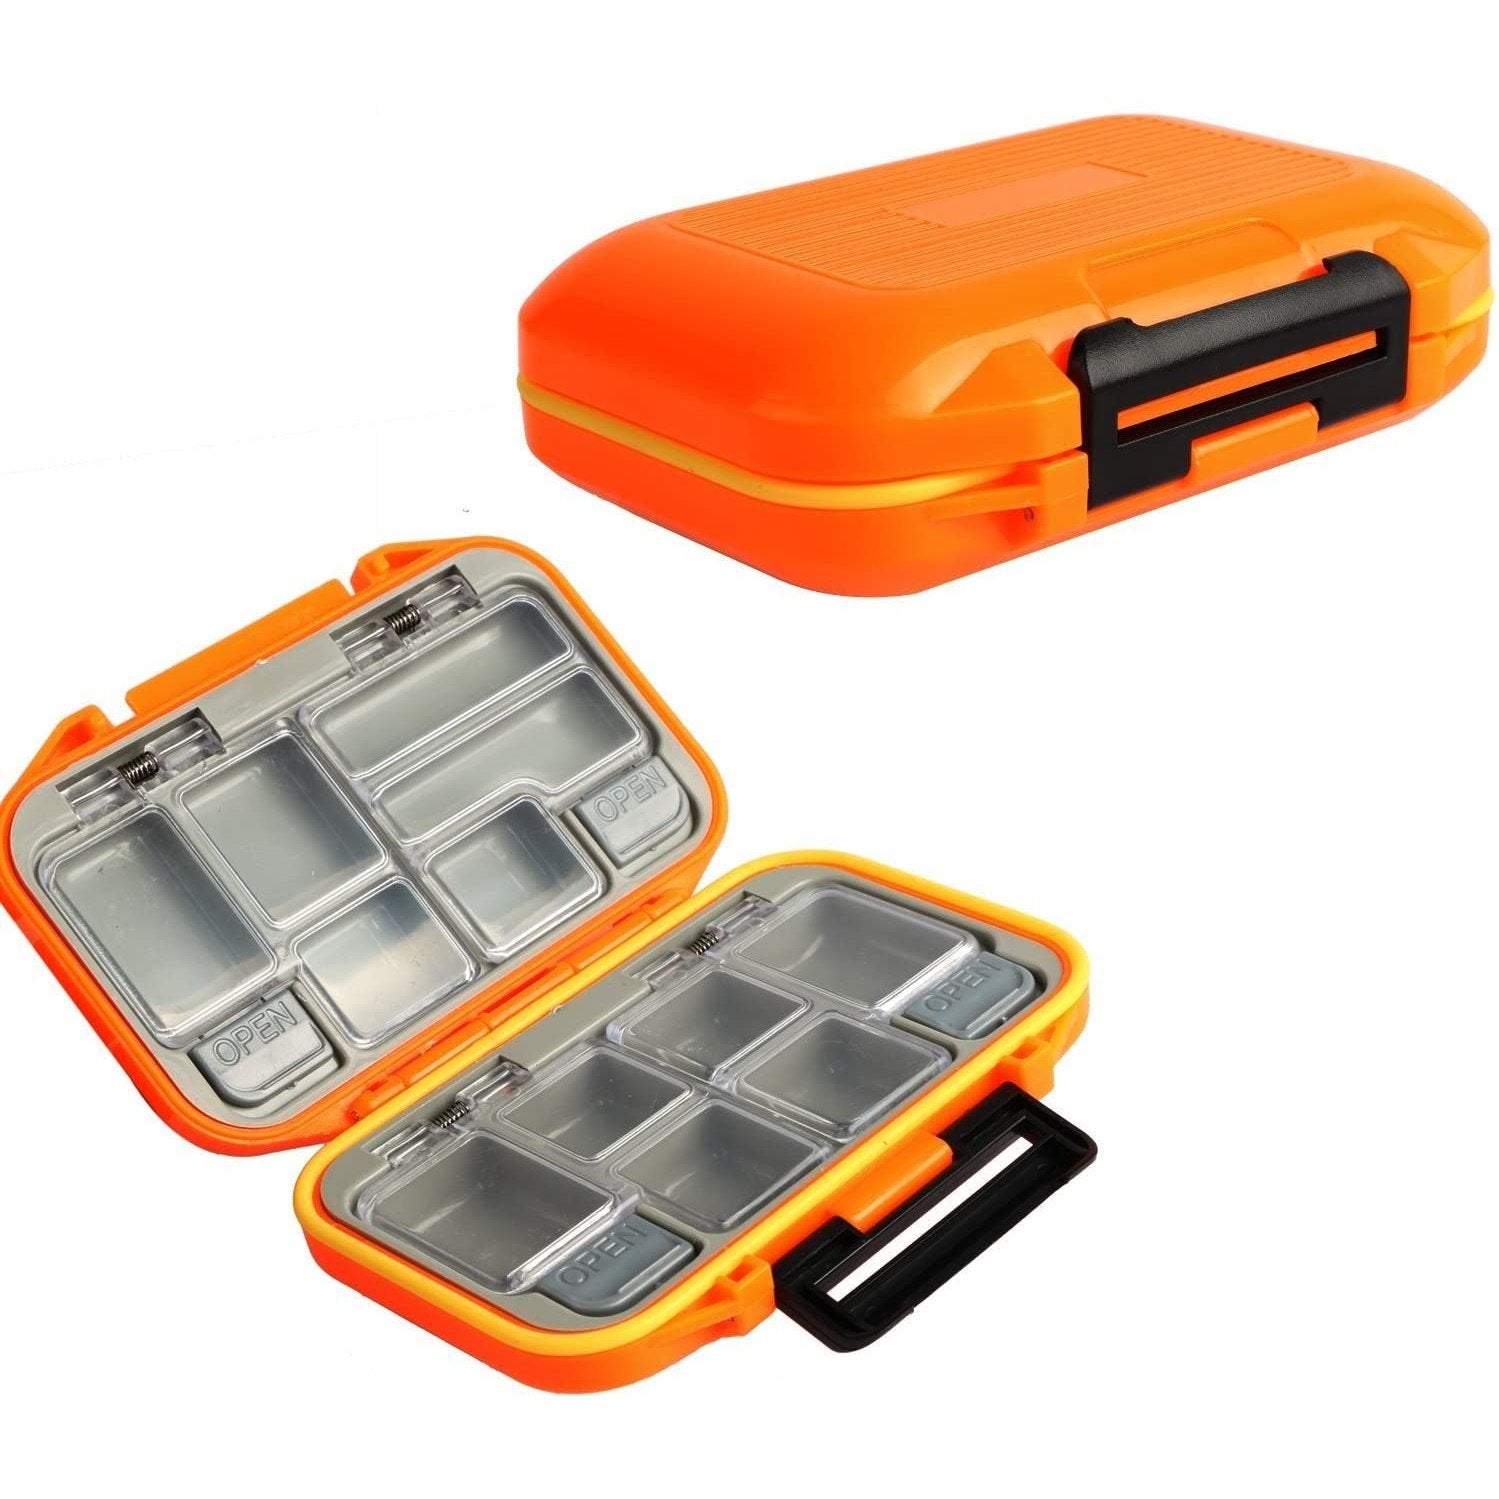 Goture Fishing Tackle Box Fishing Lures Bait Hooks Swivels Fishing Accessories Waterproof Plastic Storage Containers